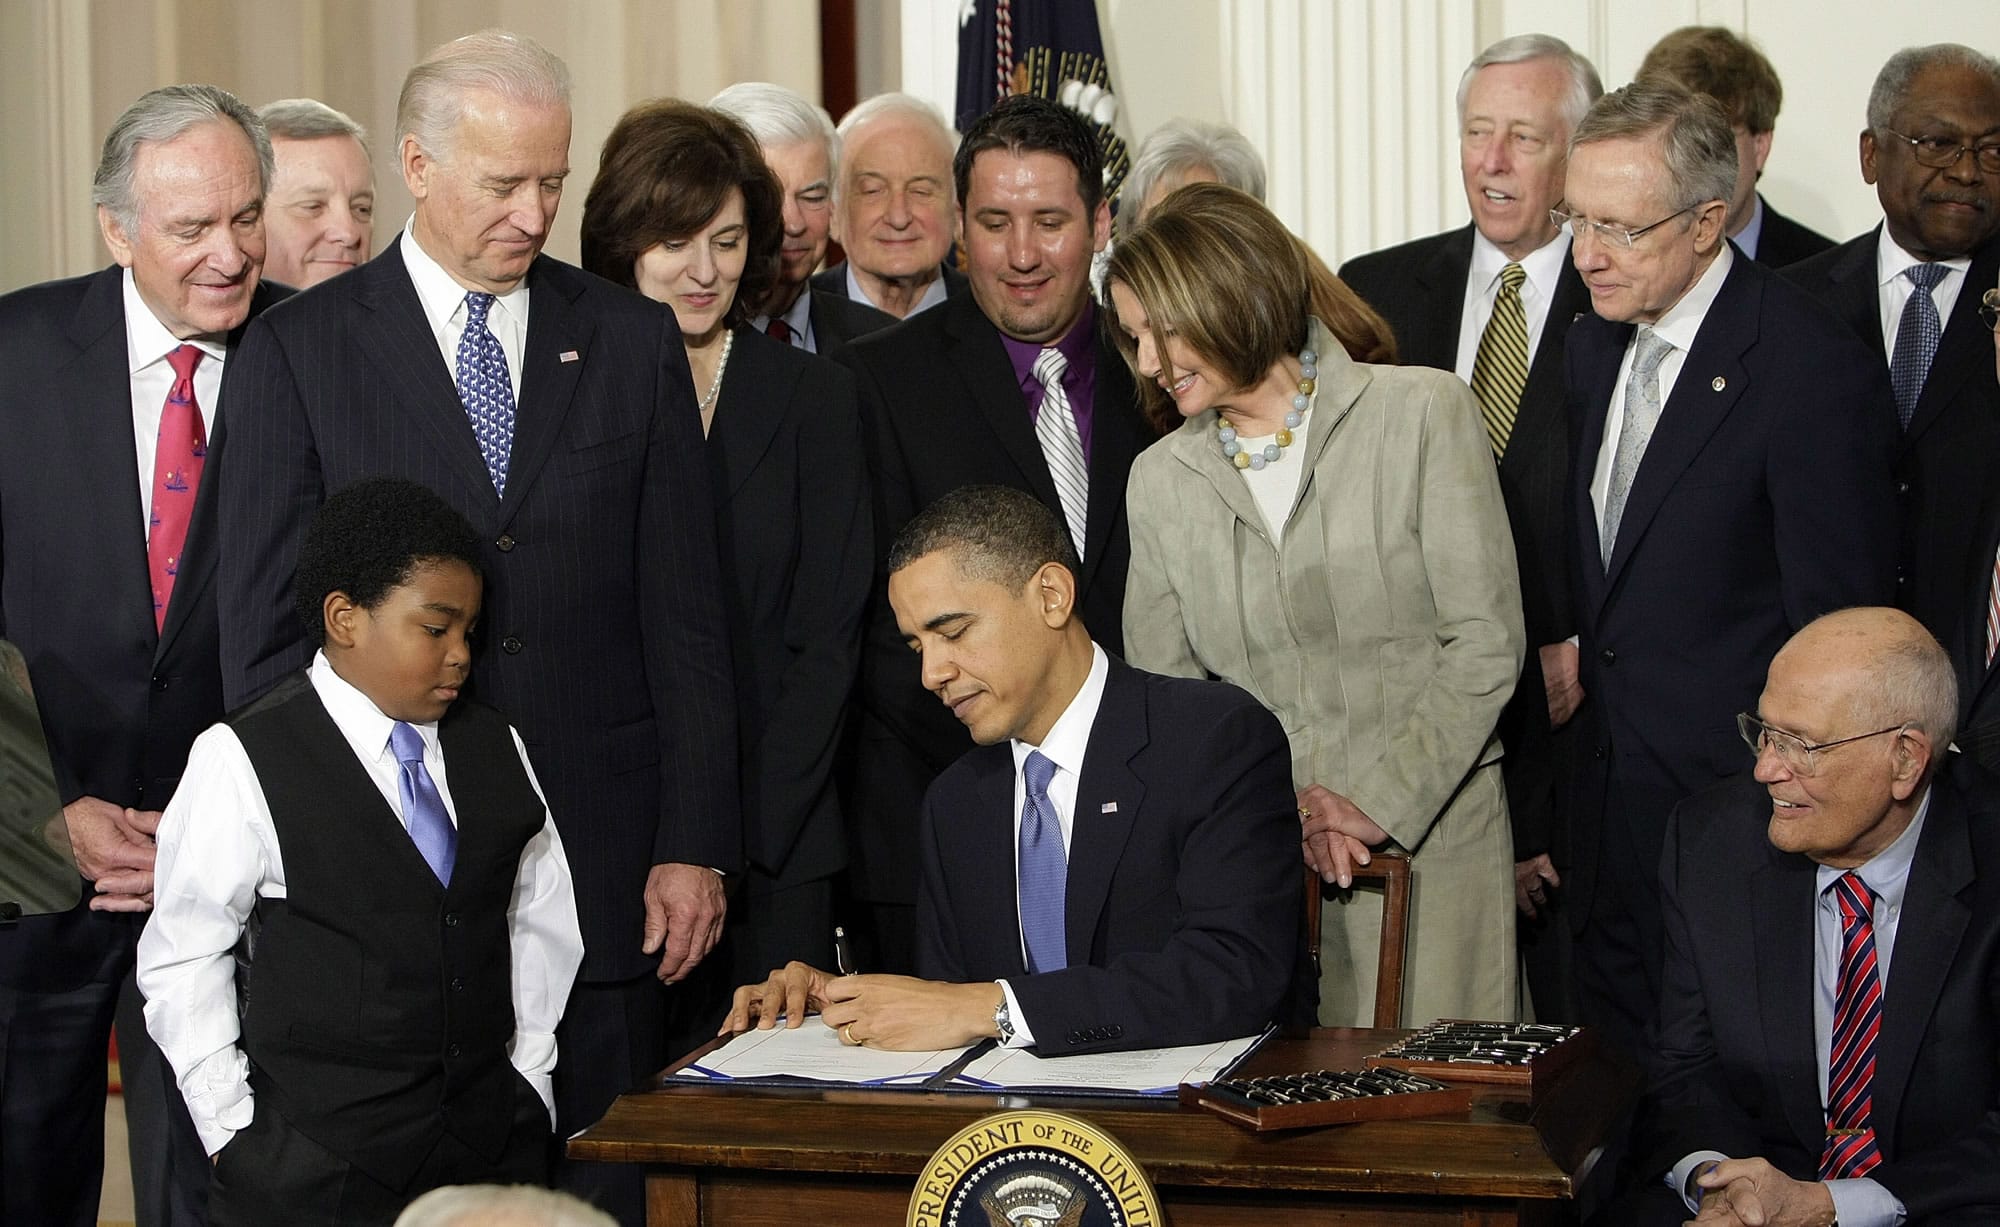 Officials and others look on as President Barack Obama signs the health care bill in the East Room of the White House in Washington on March 23, 2010. The first yearly sign-up period for the Patient Protection and Affordable Care Act closes Monday, with early returns suggesting the administration may near a projection of 7 million enrollees made before the U.S.